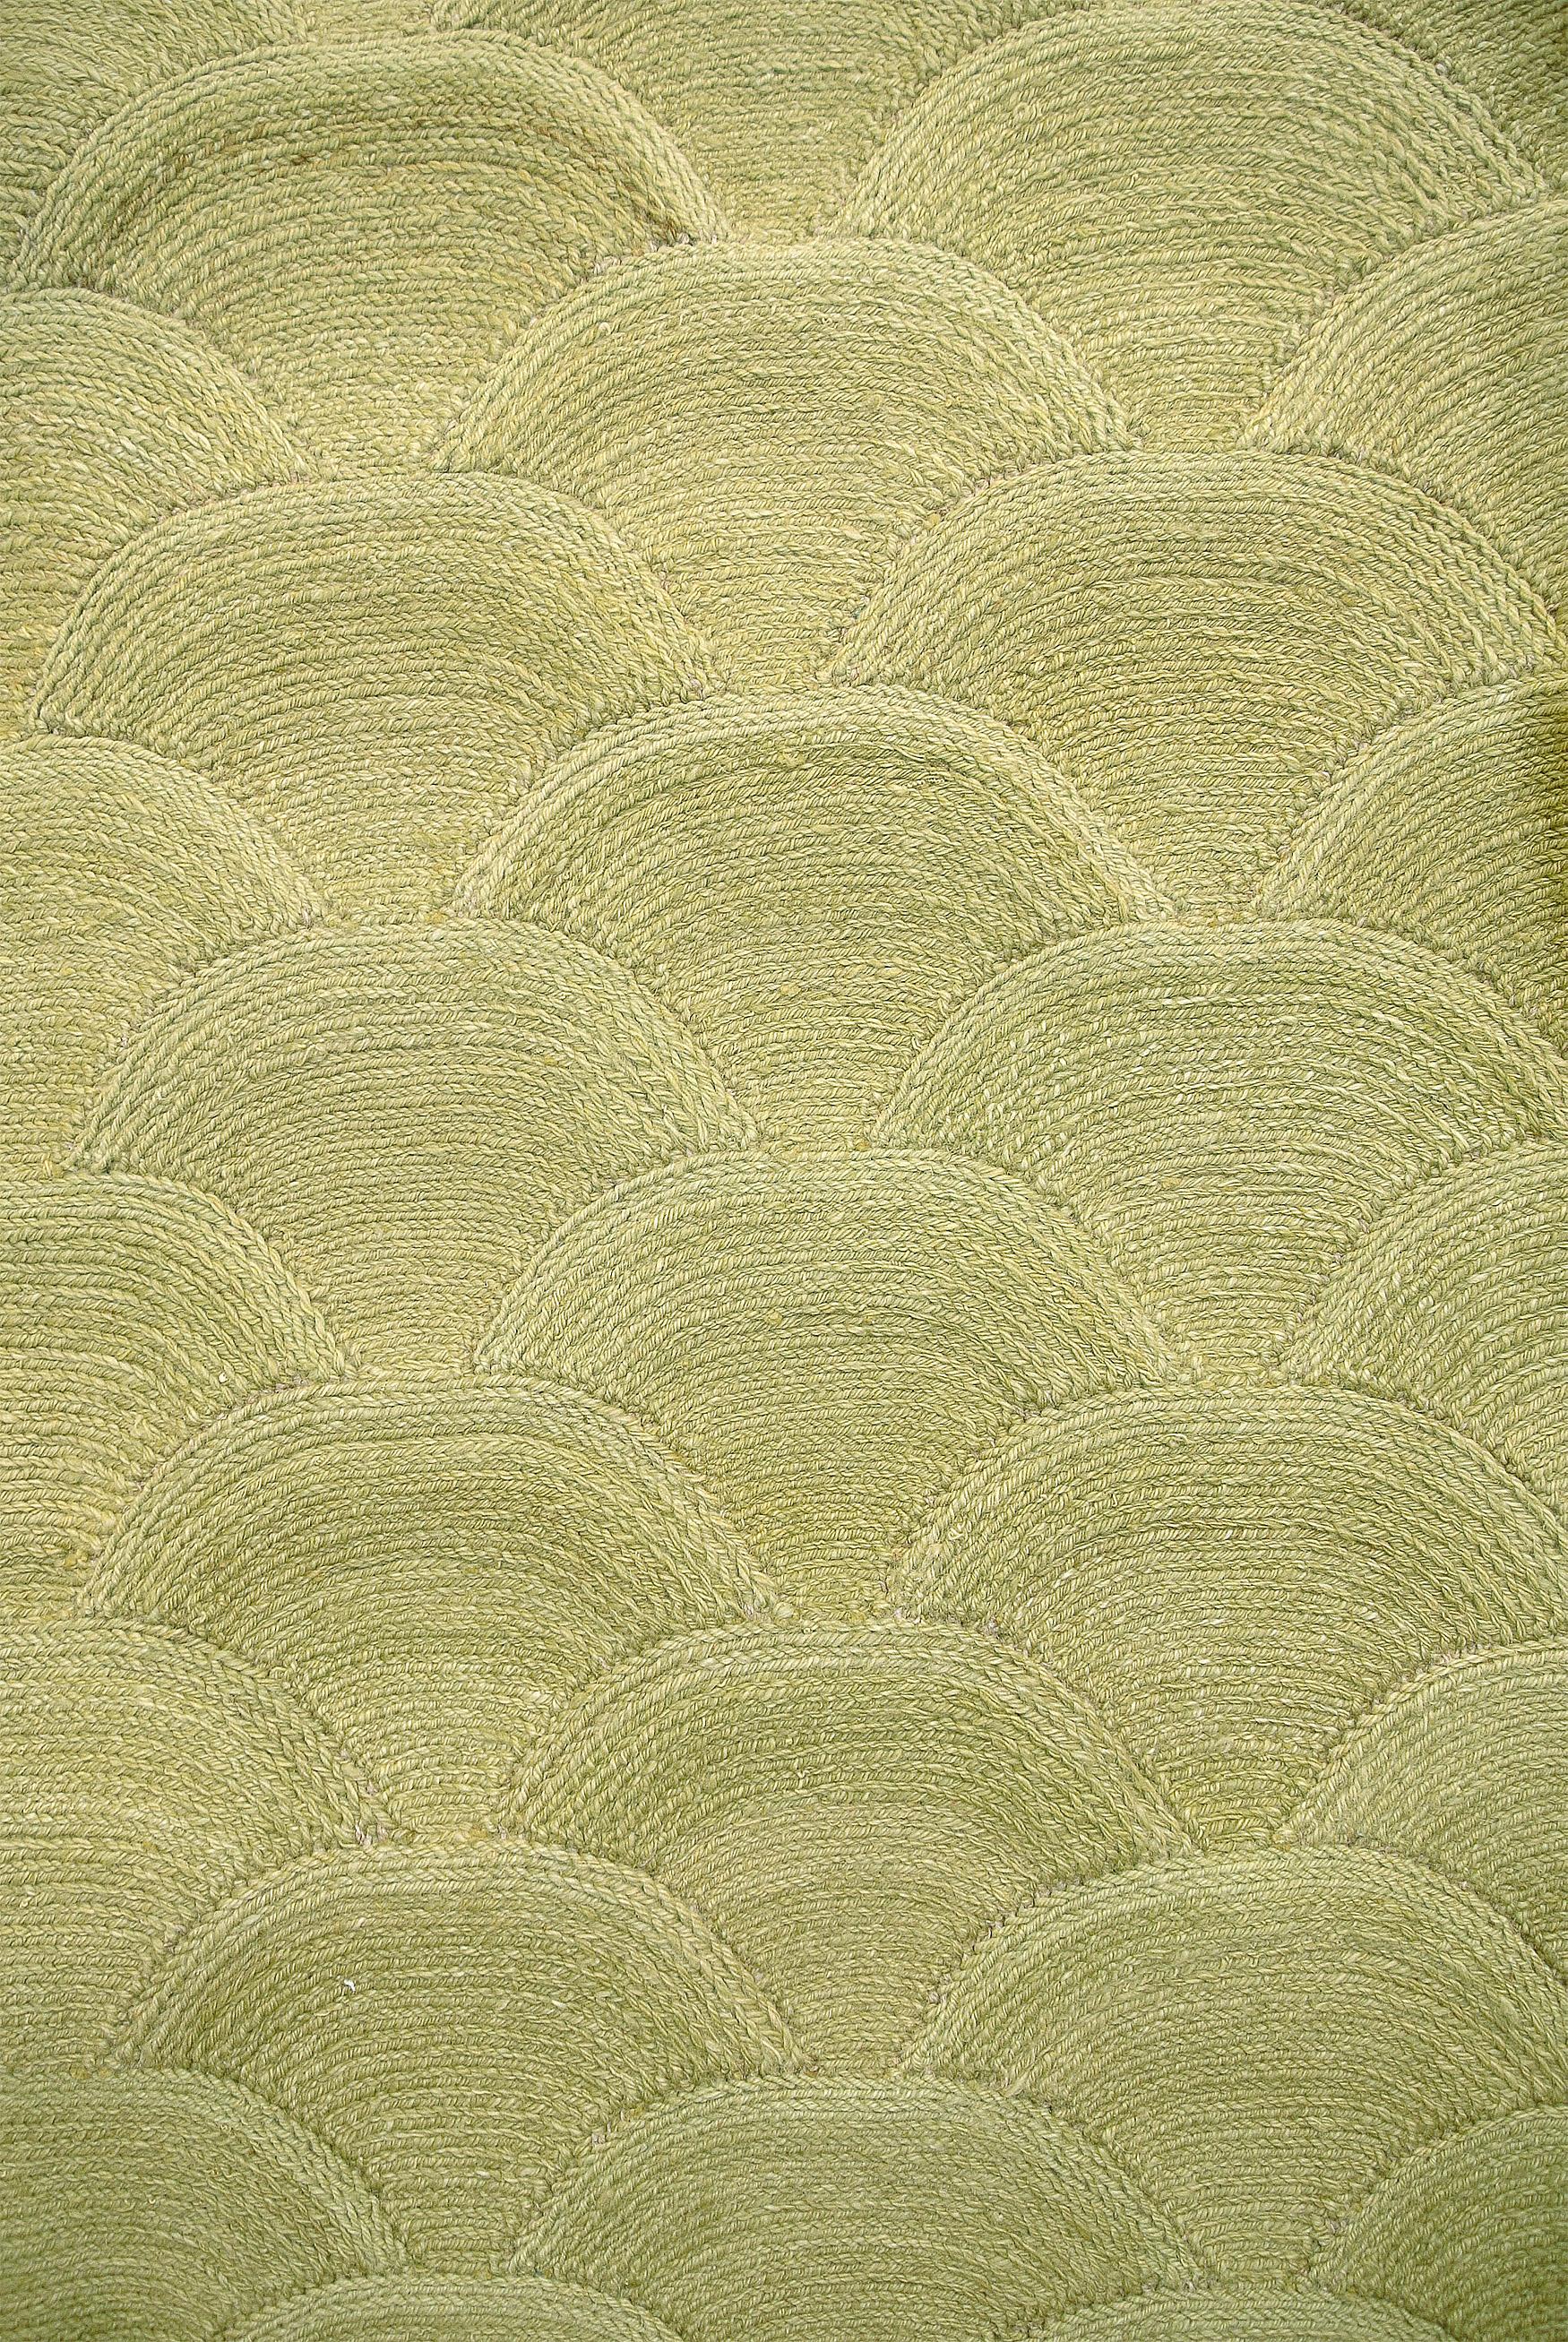 This 3’ x 5’ Orley Shabahang signature “Rice Paddy” Soumak flat-weave carpet was created using pure handspun wool and organic vegetable dyes. Woven in 2009, this limited series design exhibits unique green coloration and multidimensional texture.